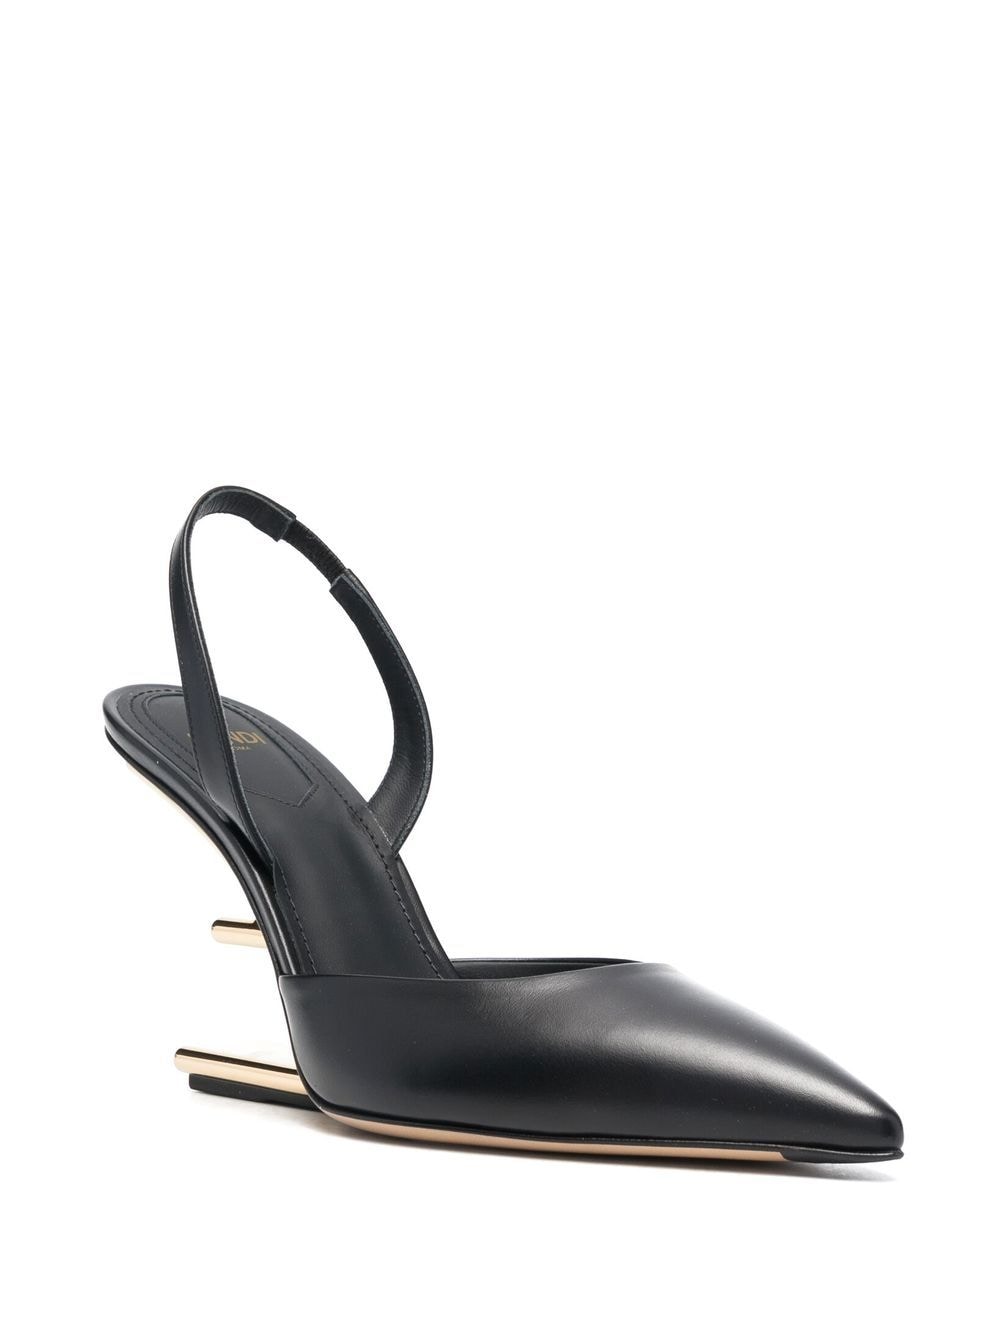 FENDI Sleek and Sophisticated 100MM Sculpted-Heel Leather Pumps for Women